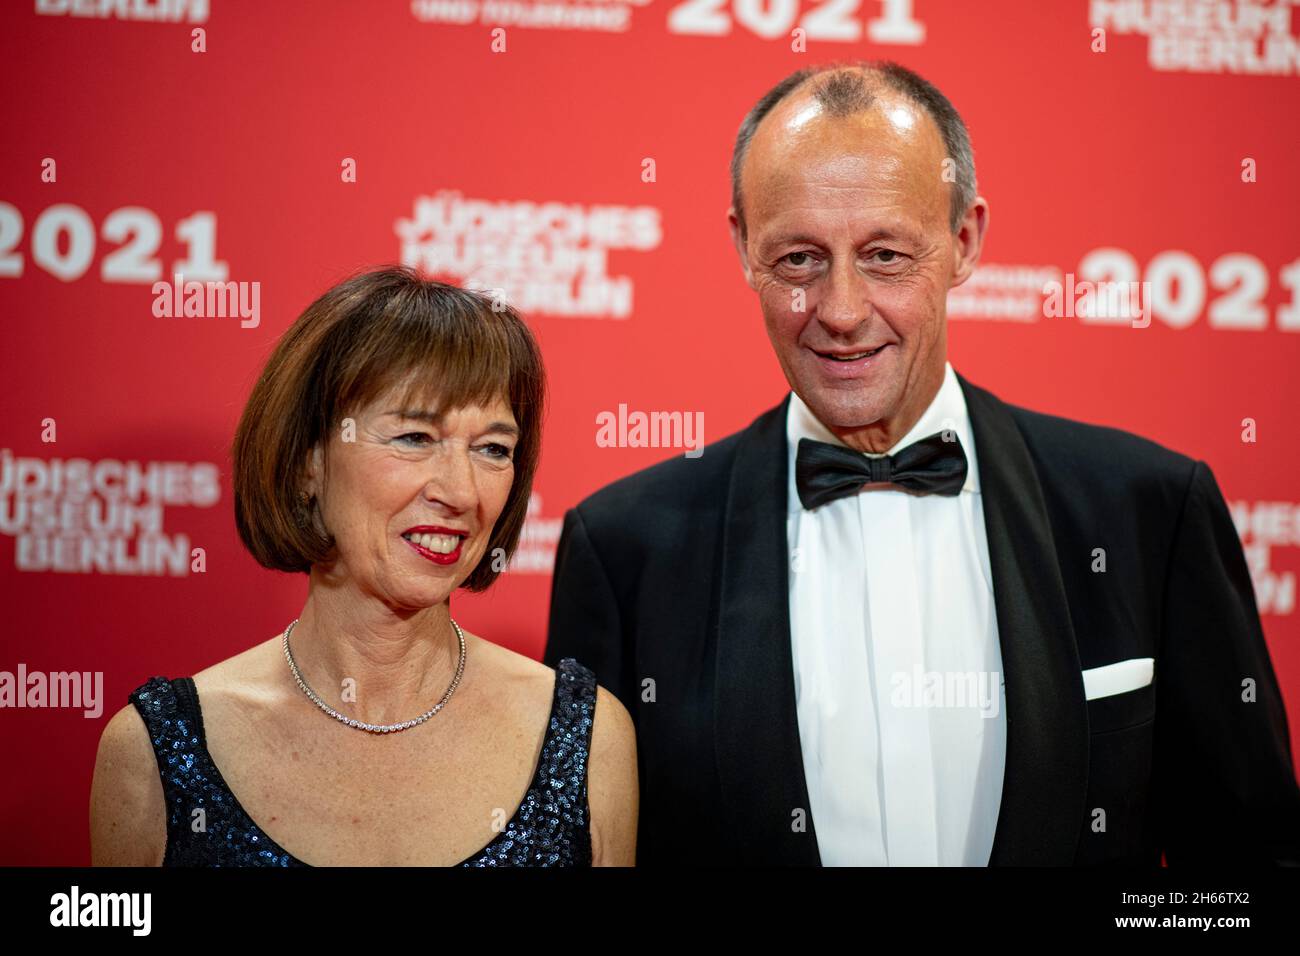 Berlin, Germany. 13th Nov, 2021. Friedrich Merz (CDU), politician, and his wife Charlotte Merz stand at the press wall at the award ceremony for the 'Prize for Understanding and Tolerance'. The prize goes to the President of the Jewish Community of Munich and Upper Bavaria Knobloch and the architect Libeskind. Stephan Habrath, President of the Federal Constitutional Court, Daniella Luxembourg, art dealer, Credit: Fabian Sommer/dpa/Alamy Live News Stock Photo